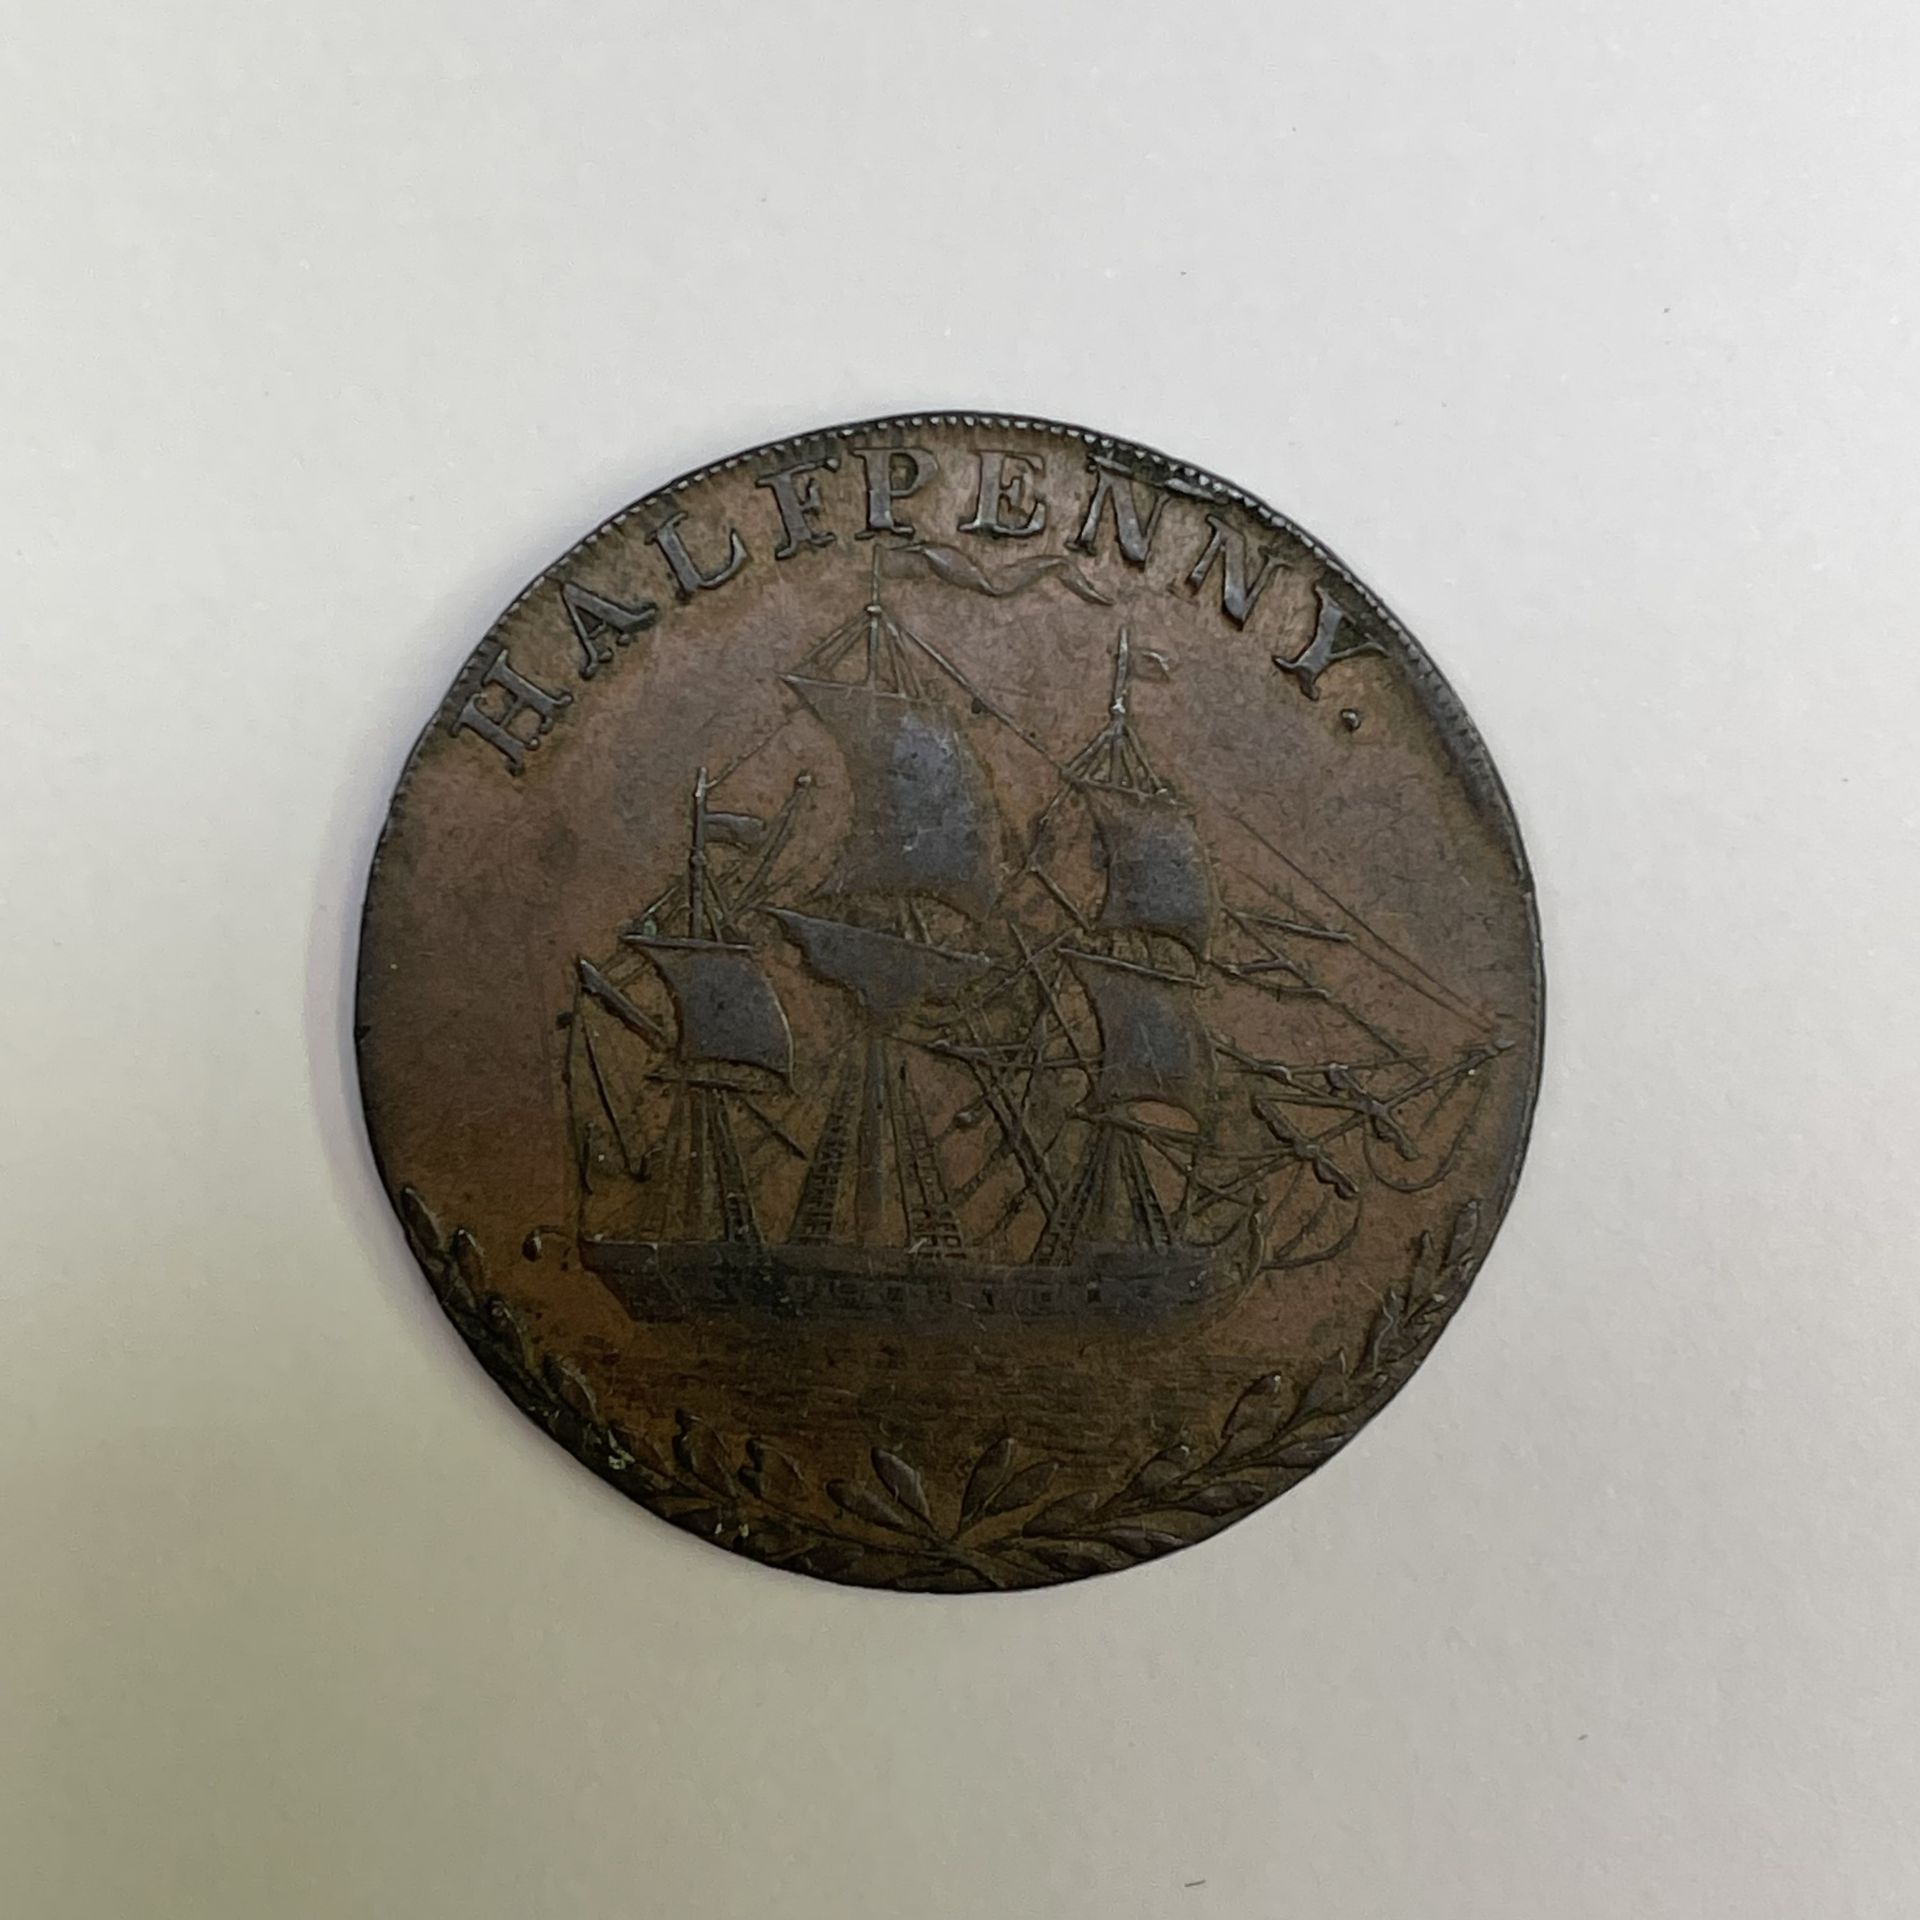 Great Britain and World Coins An 1888 silver 2/- coin (EF+), a circa 1800 copper trading - Image 6 of 11